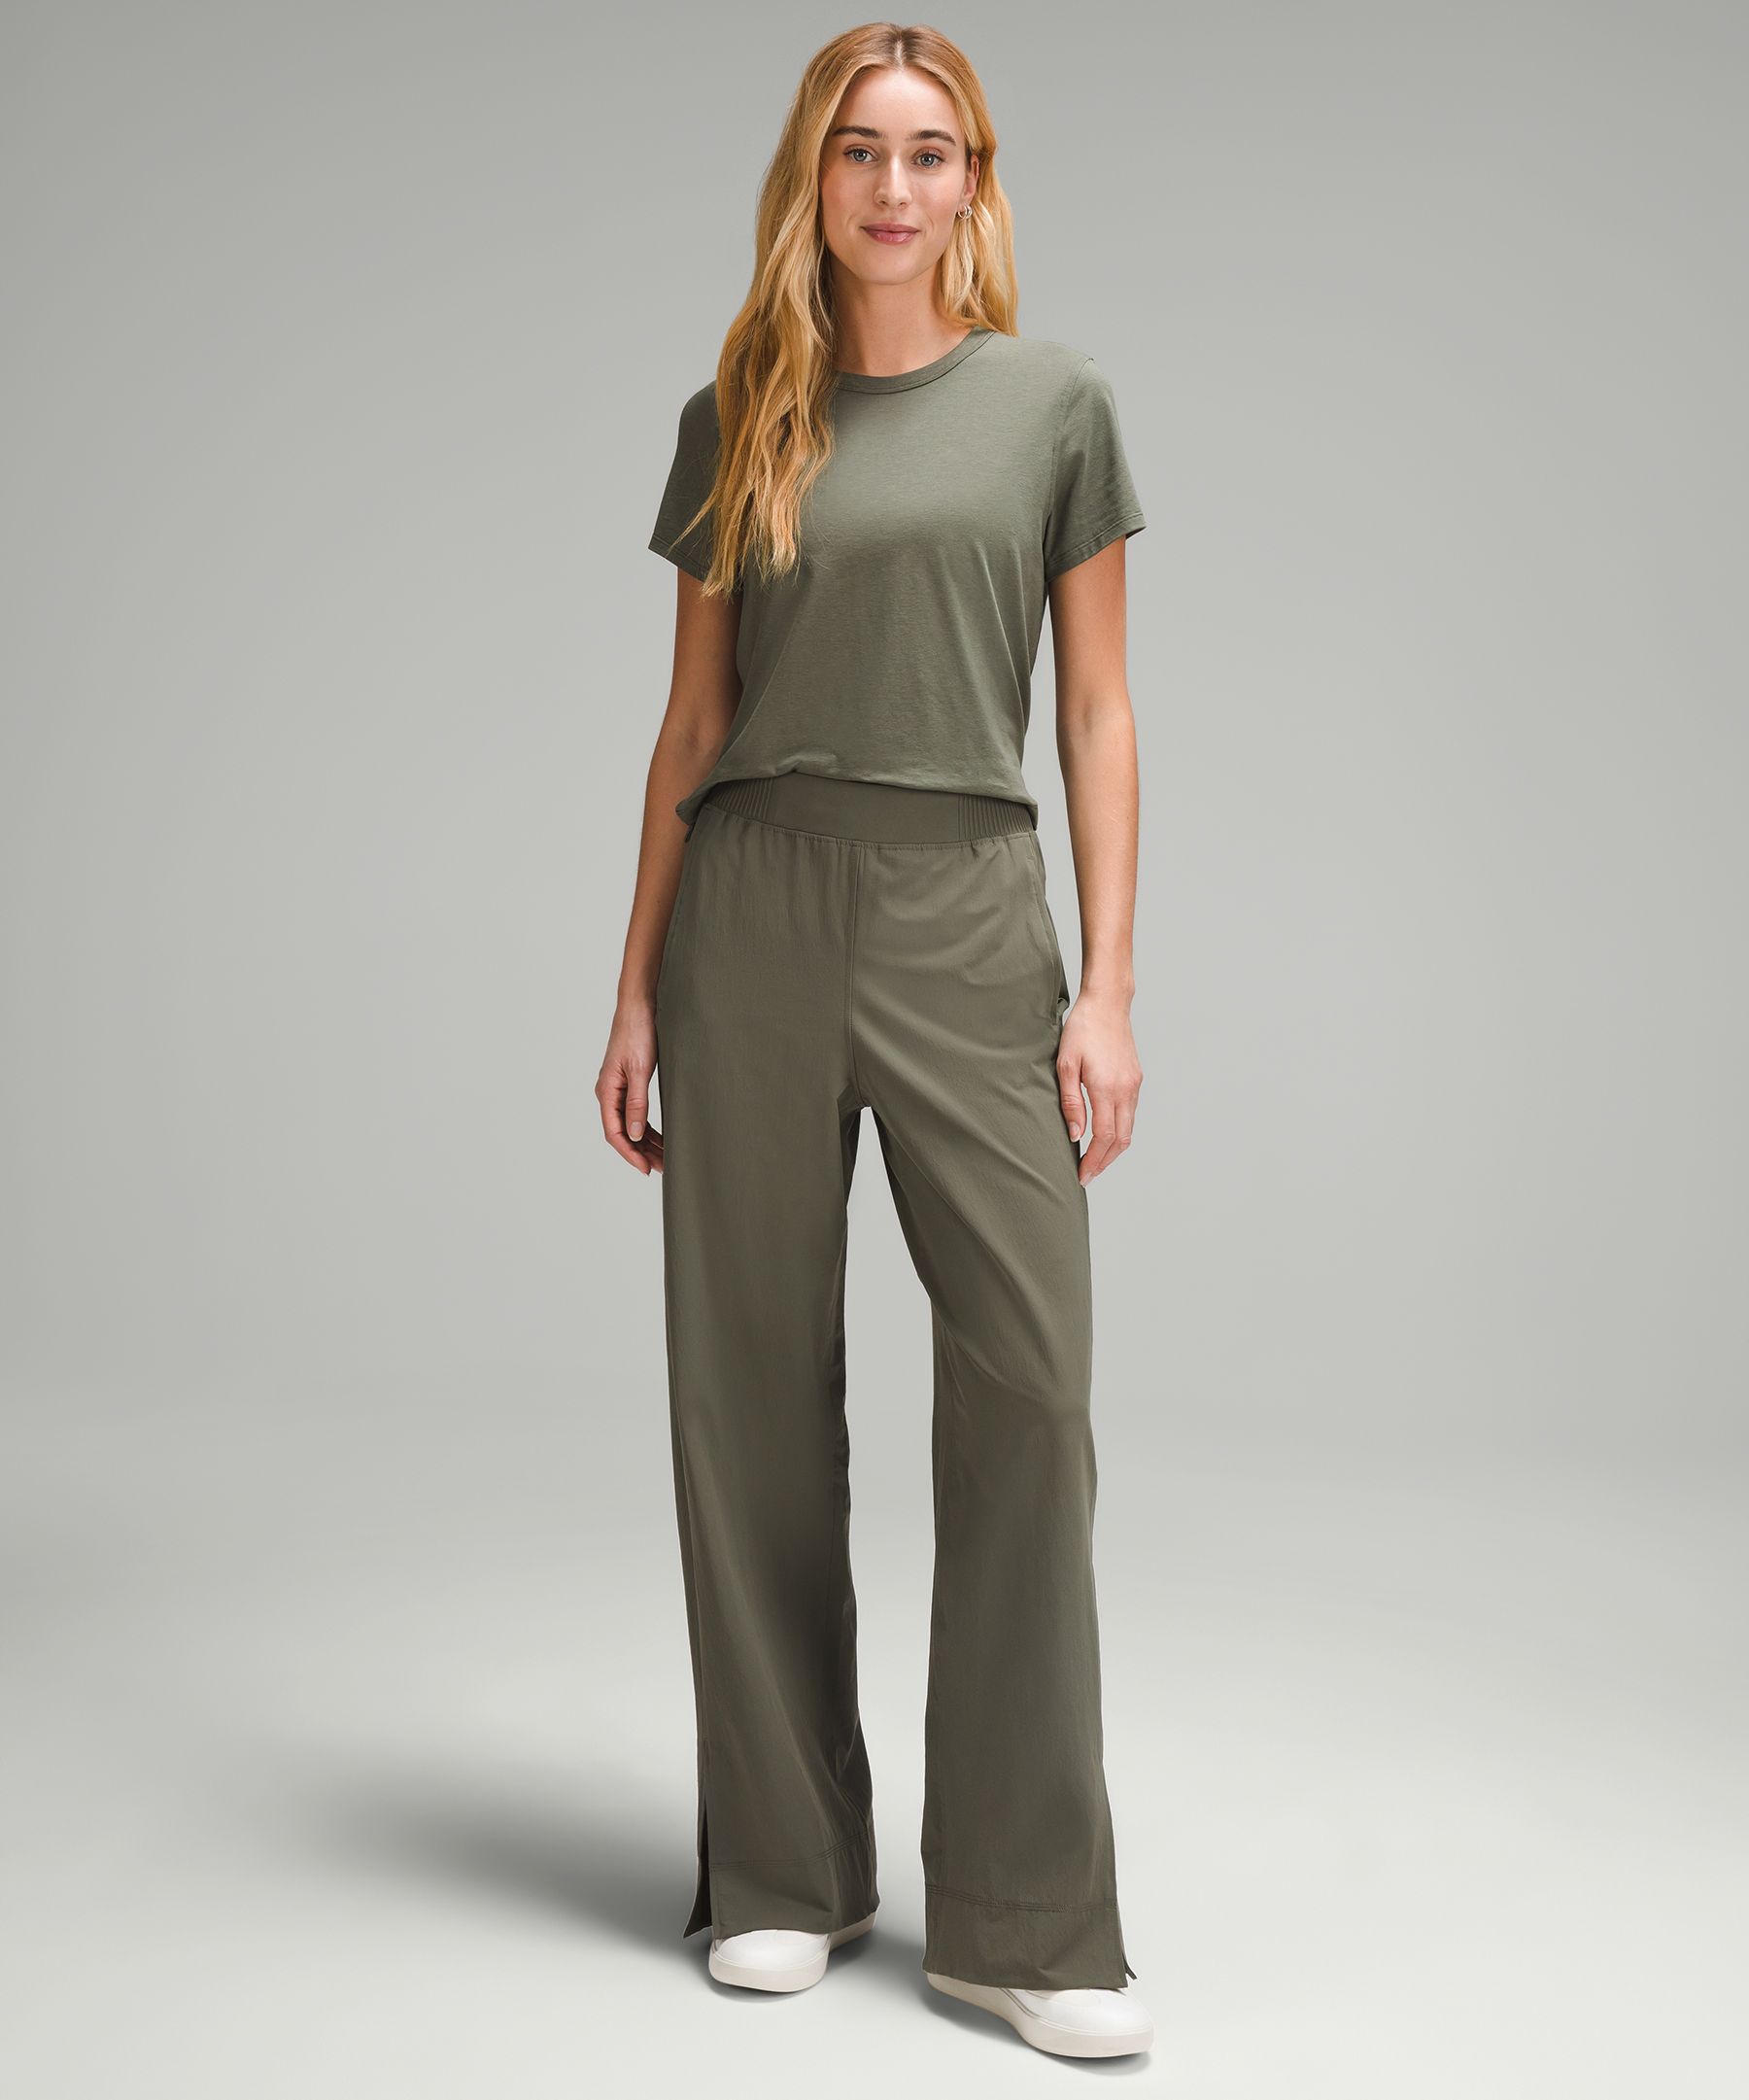 Lululemon Green Cargo Pants For Women  International Society of Precision  Agriculture